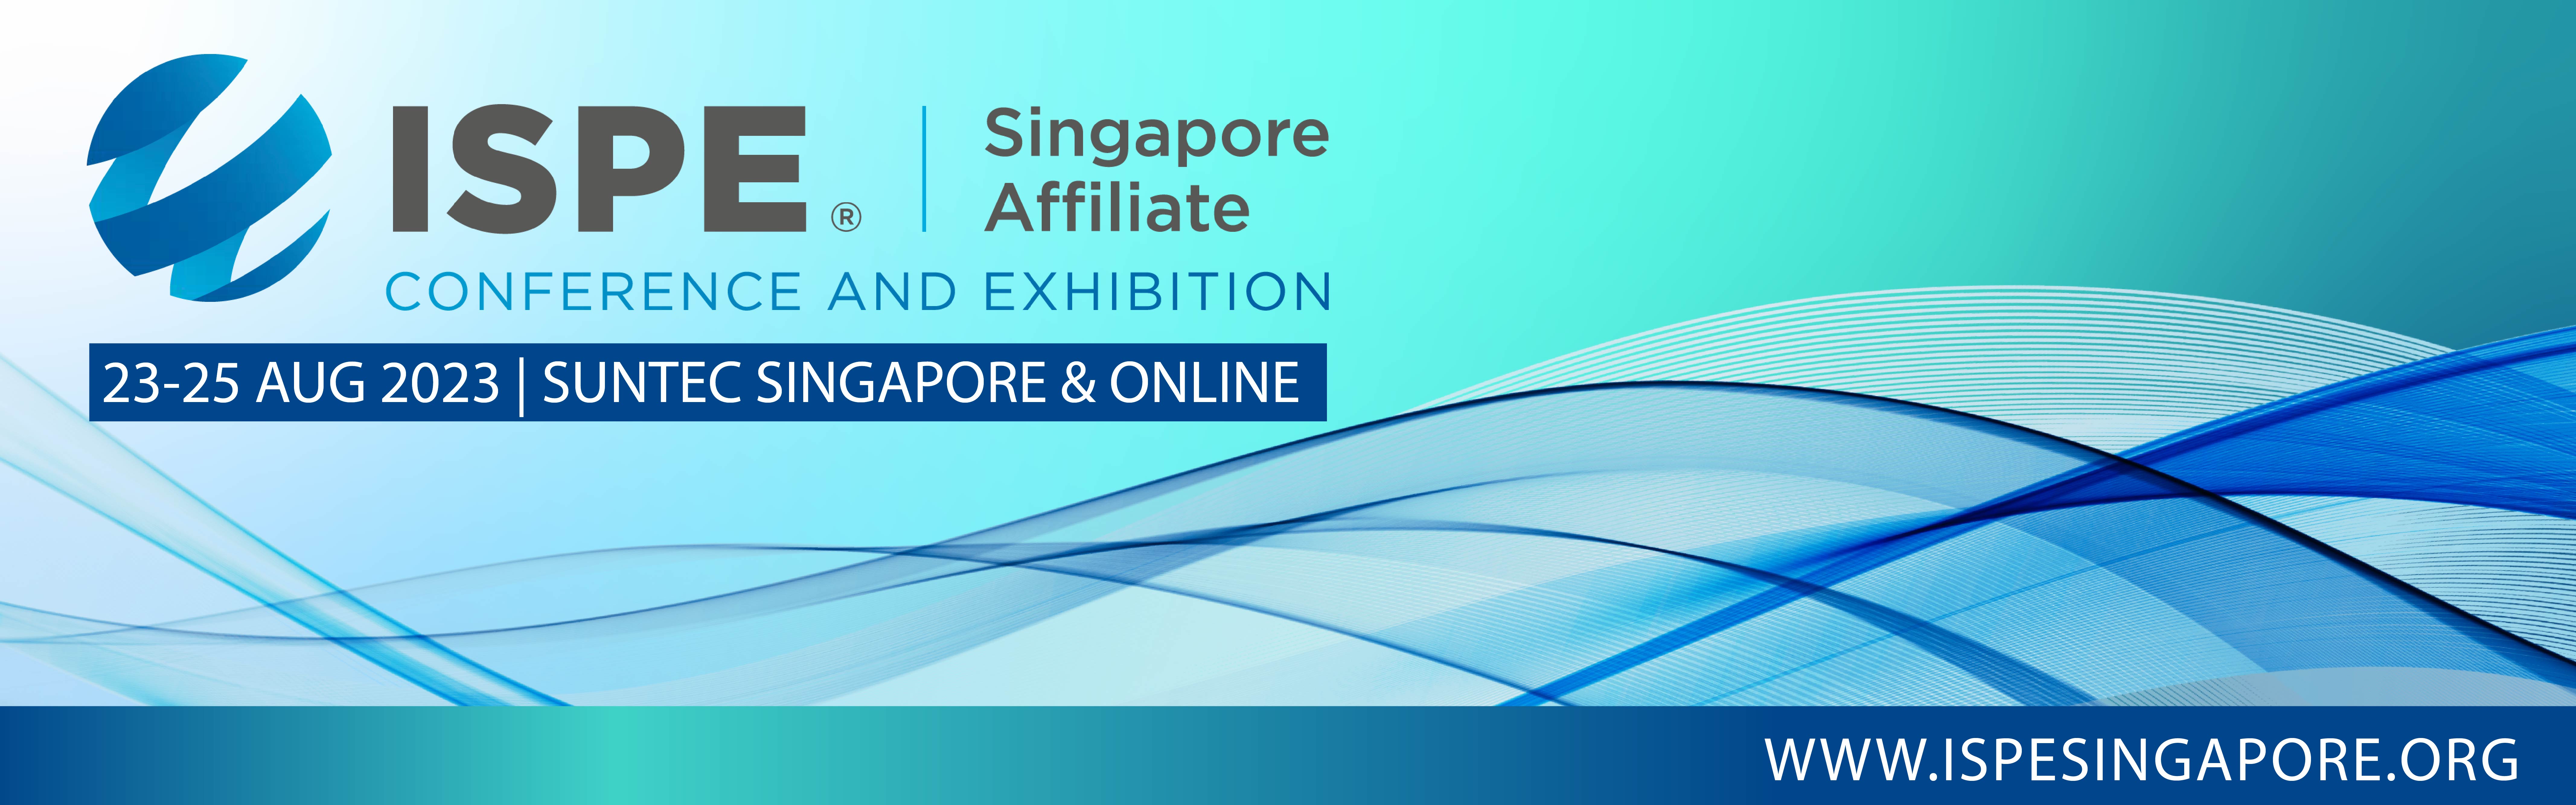 ISPE Singapore Conference & Exhibition 2023_Banner